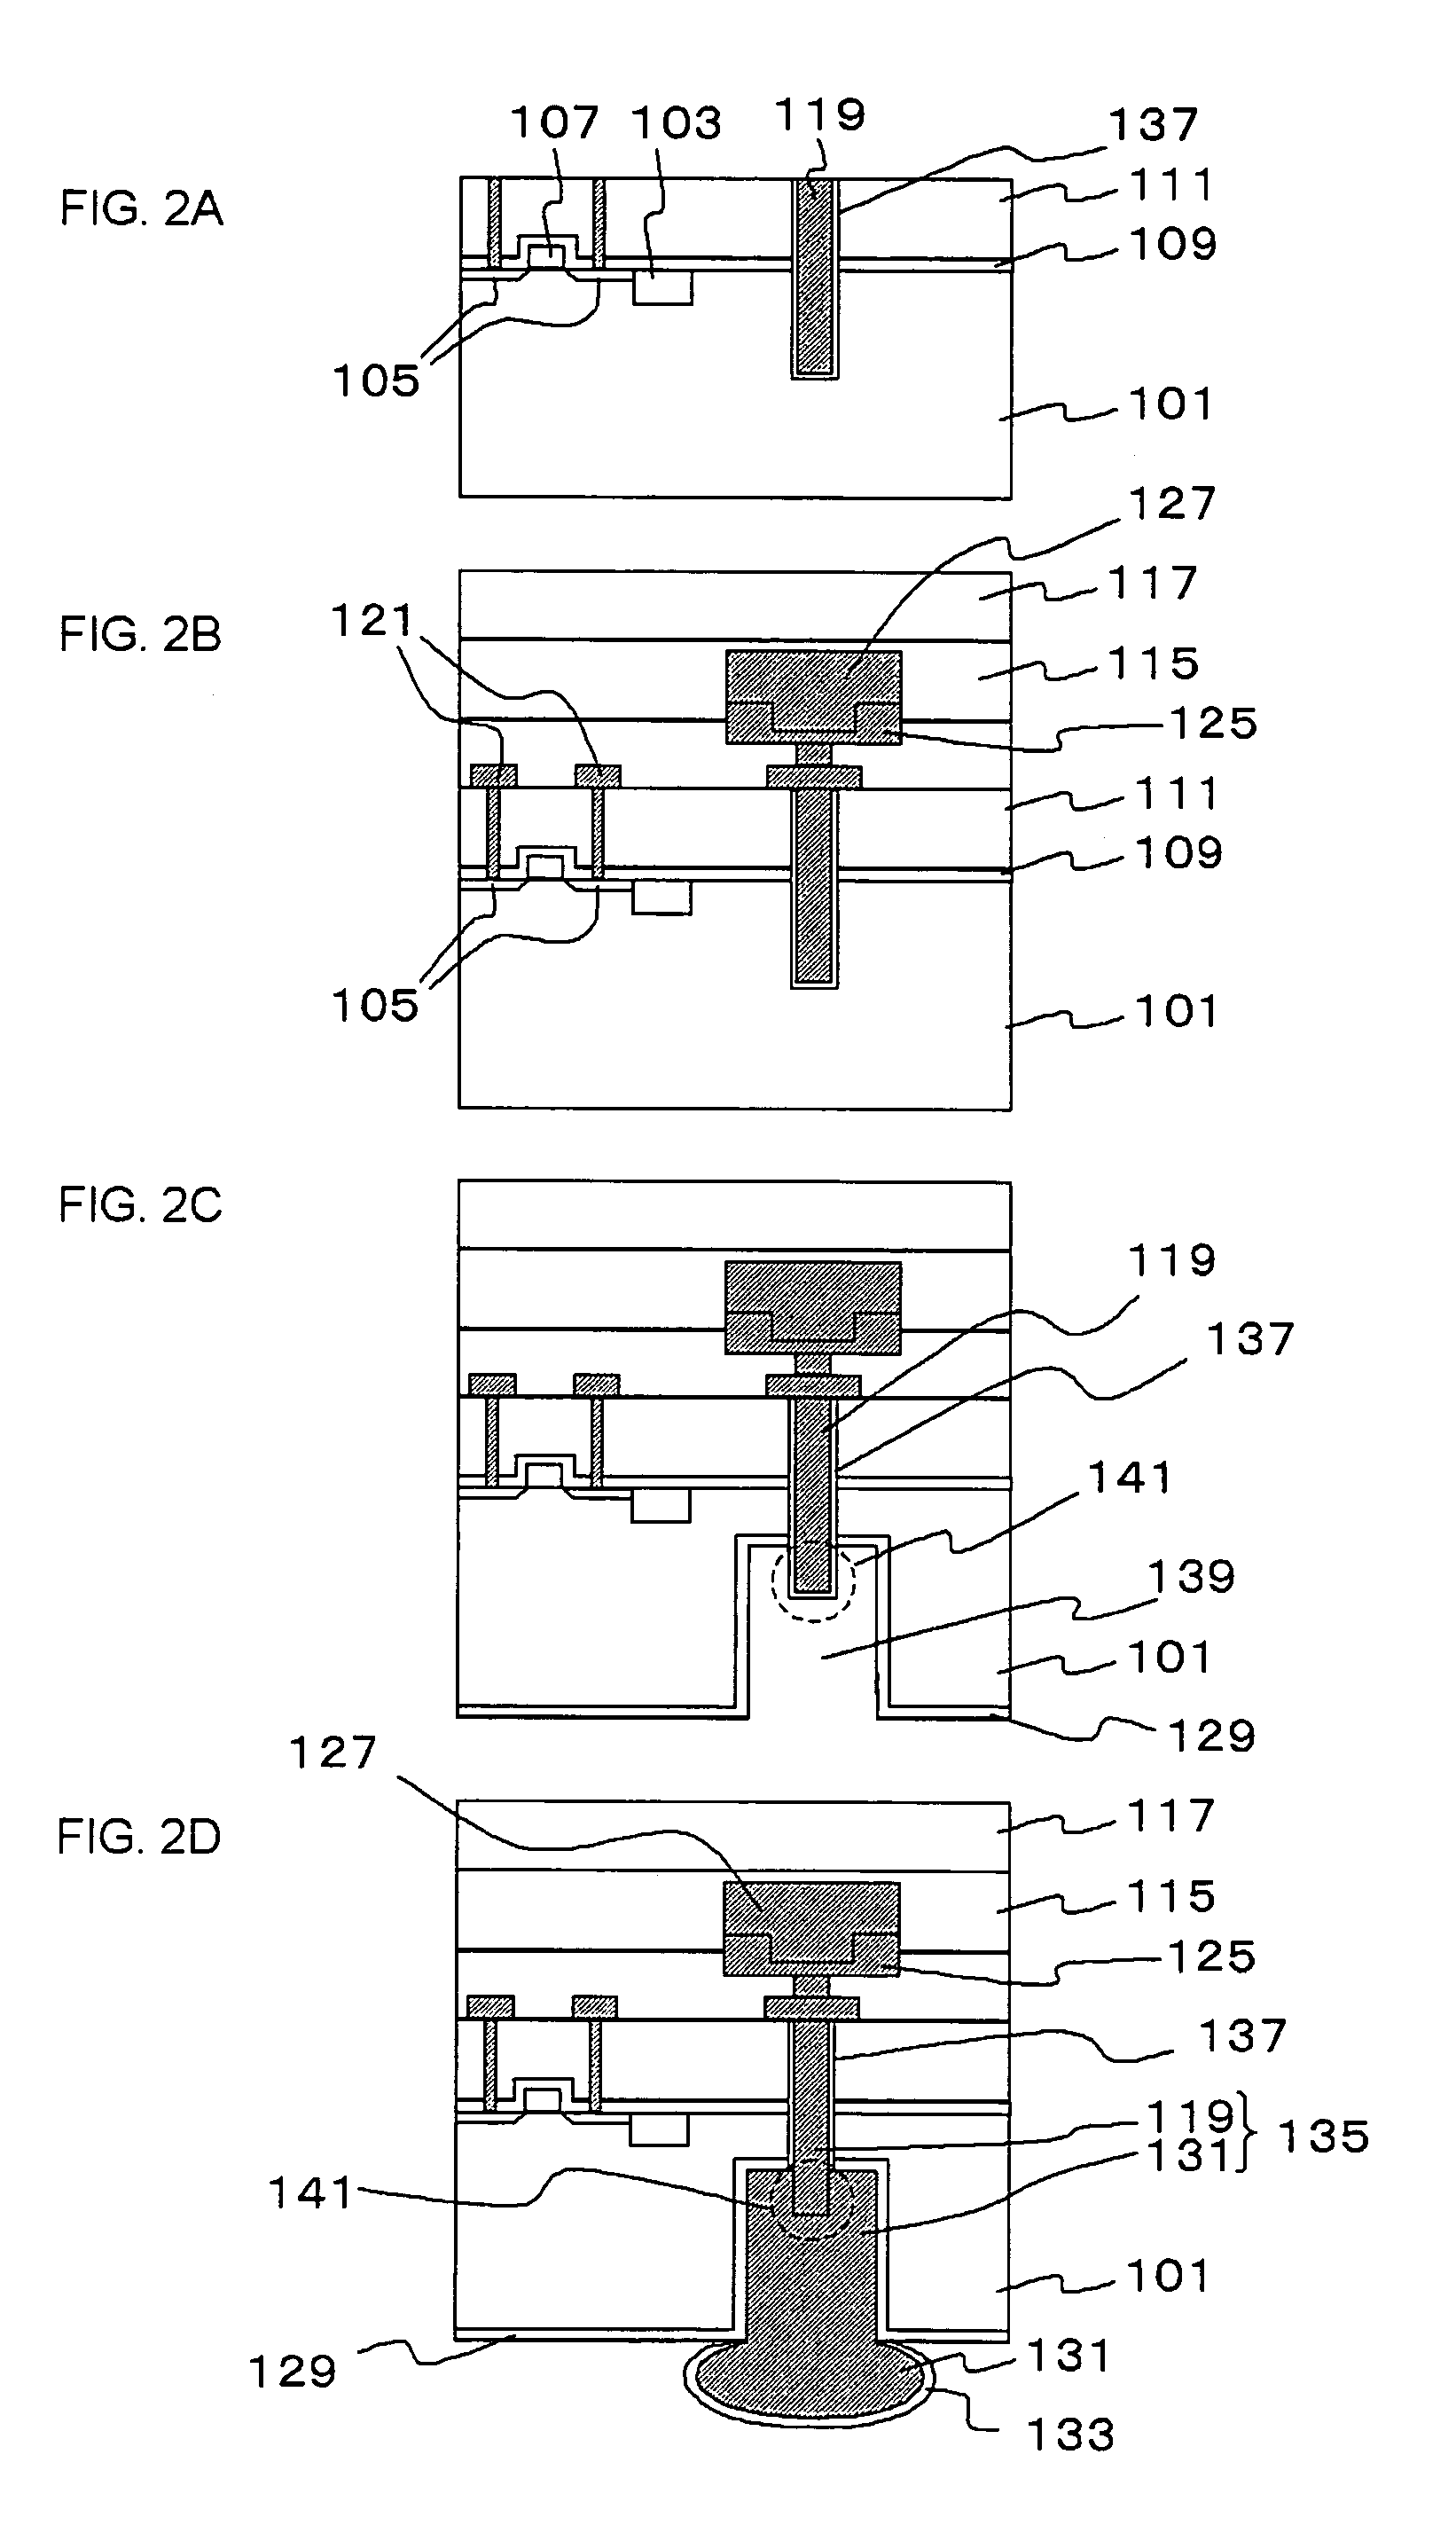 Semiconductor device comprising through-electrode interconnect